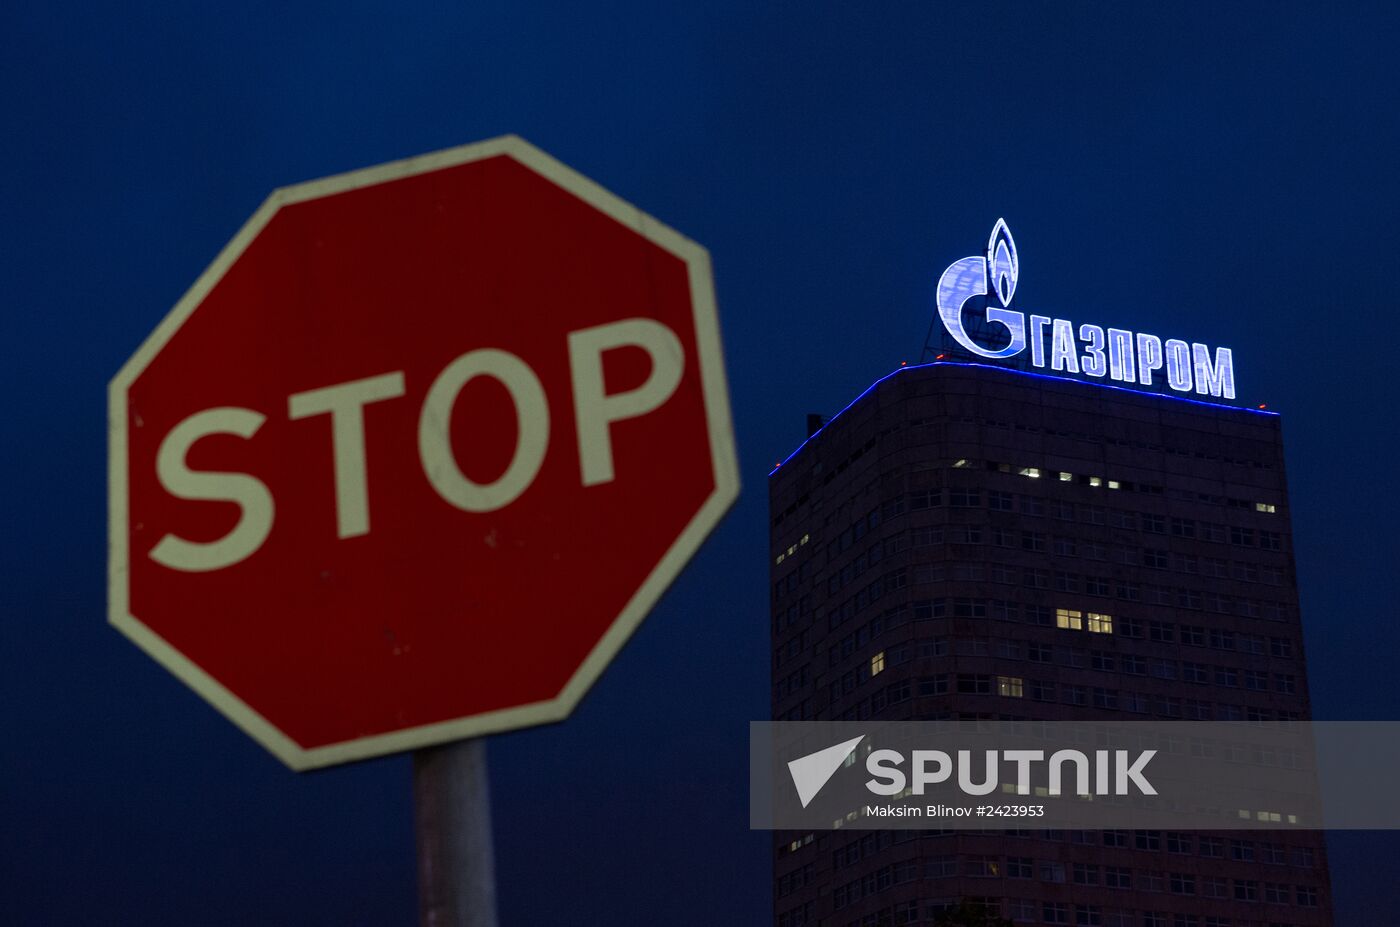 Gazprom logo on an administrative building in Moscow